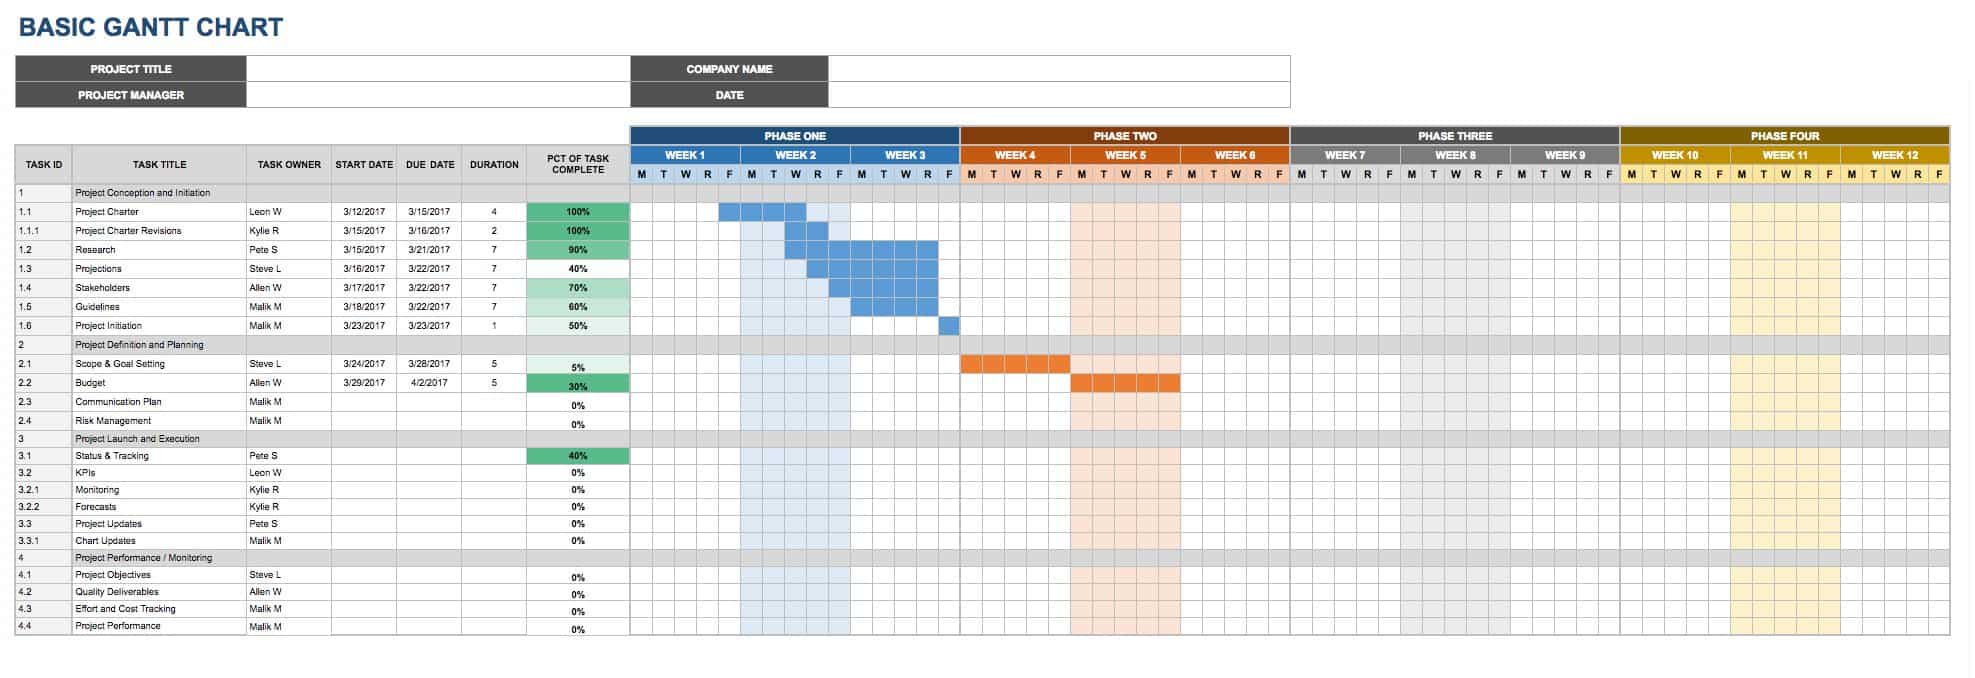 Project Schedule Excel Template